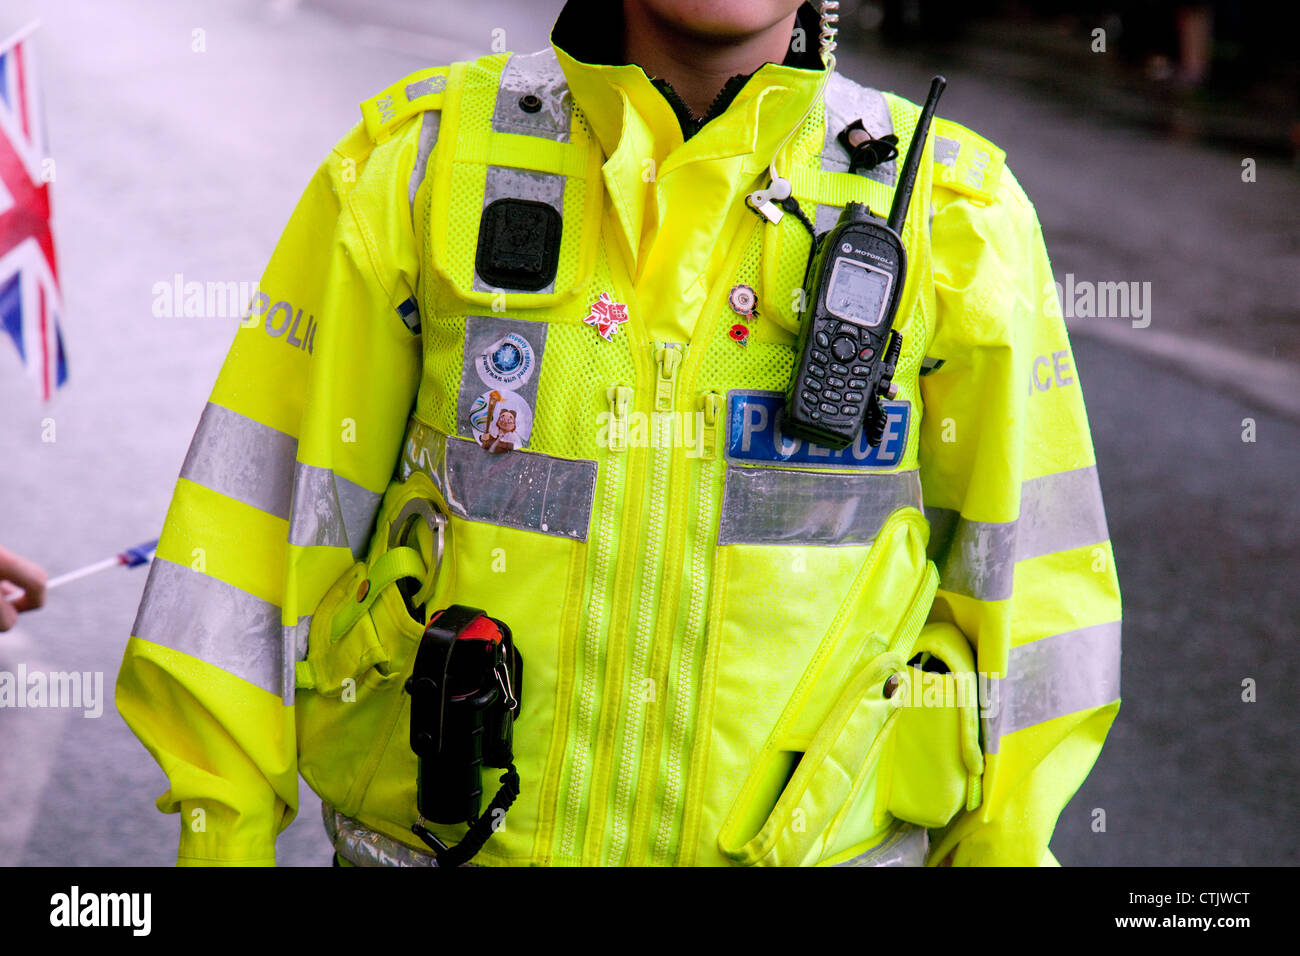 Police UK; Policewoman in a fluorescent uniform, showing close up of police equipment, Suffolk England UK Stock Photo